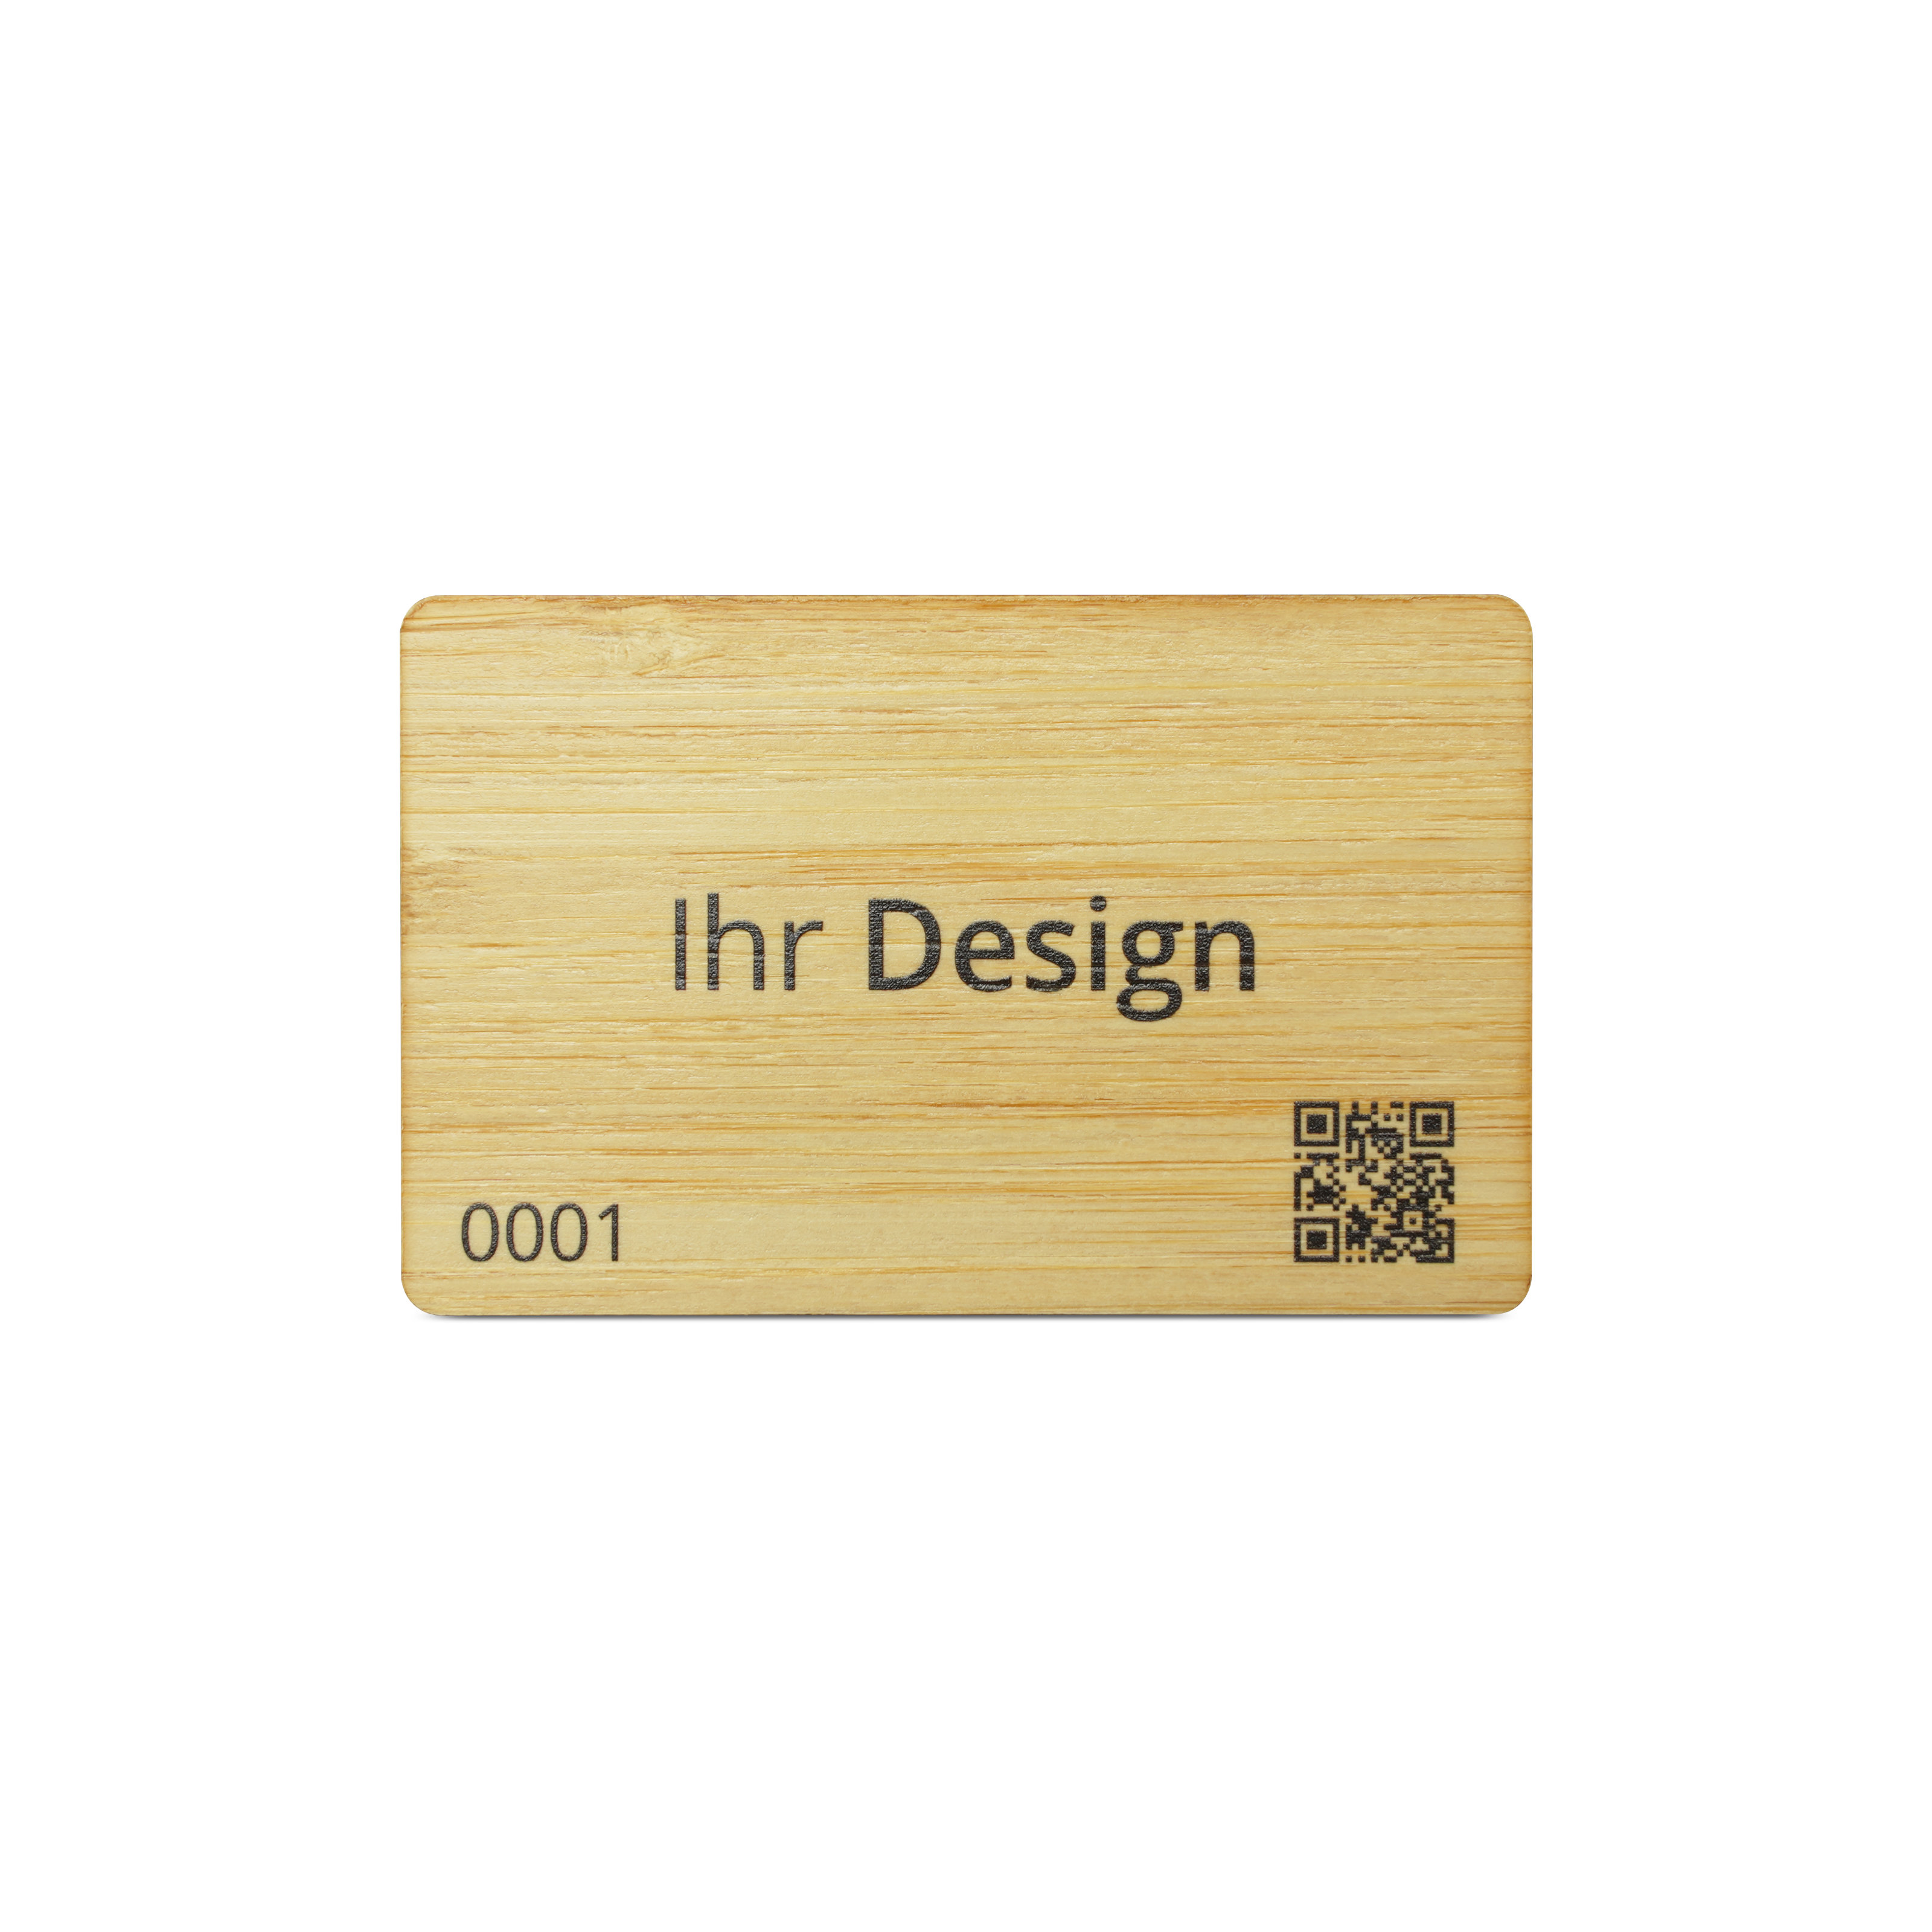 Online NFC business card - incl. NFC vCard access - bamboo - 85.6 x 54 mm - wood look - printed